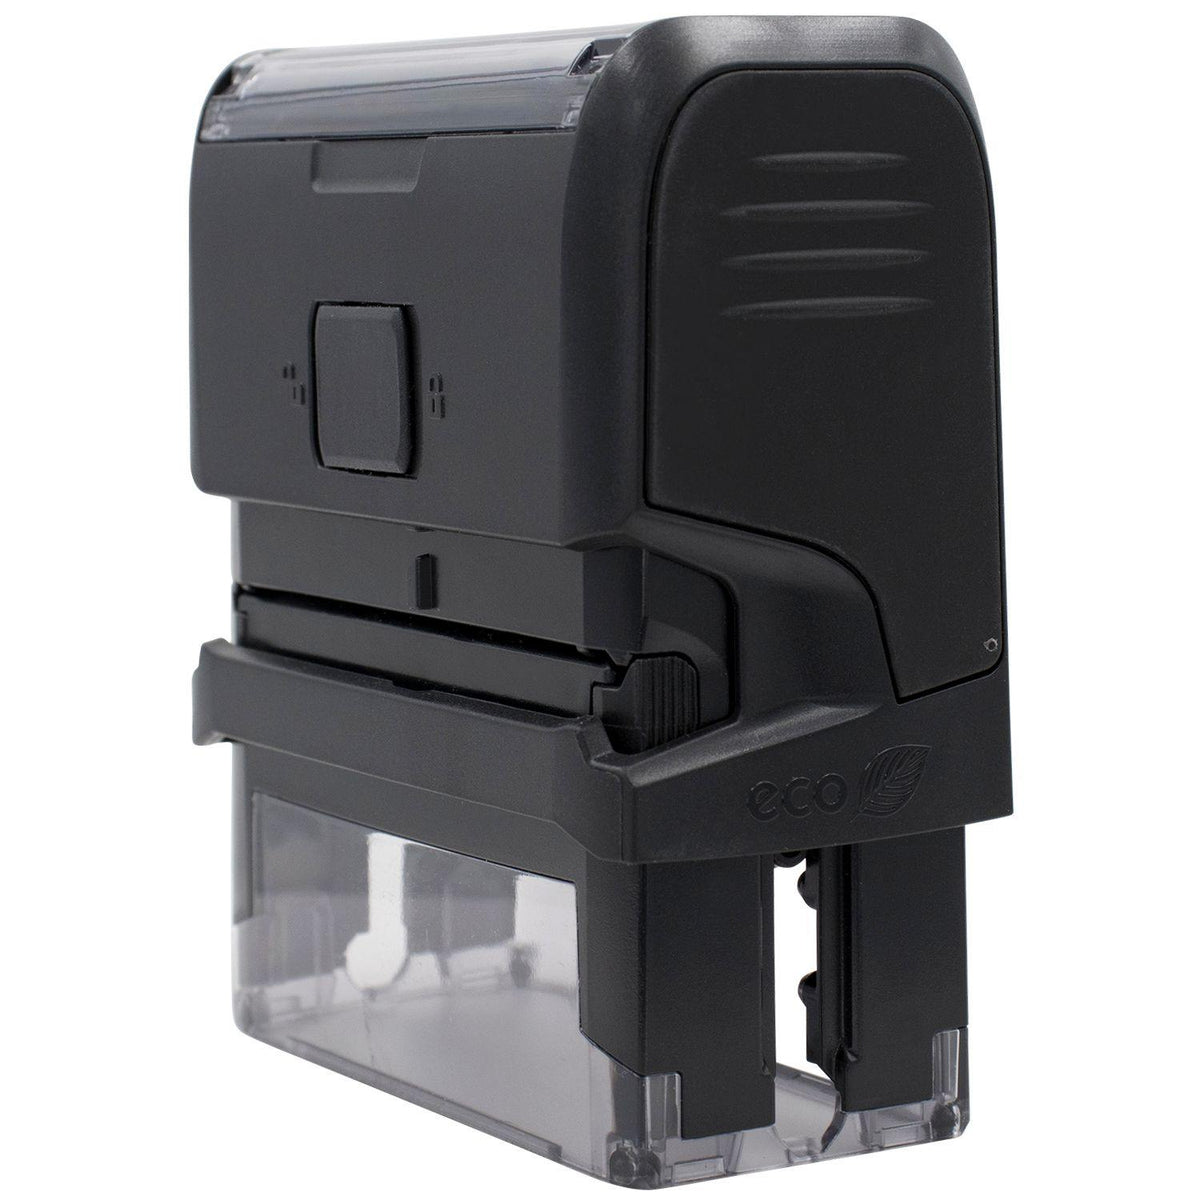 Self Inking Secure Stamp - Engineer Seal Stamps - Brand_Trodat, Impression Size_Small, Stamp Type_Self-Inking Stamp, Type of Use_Office